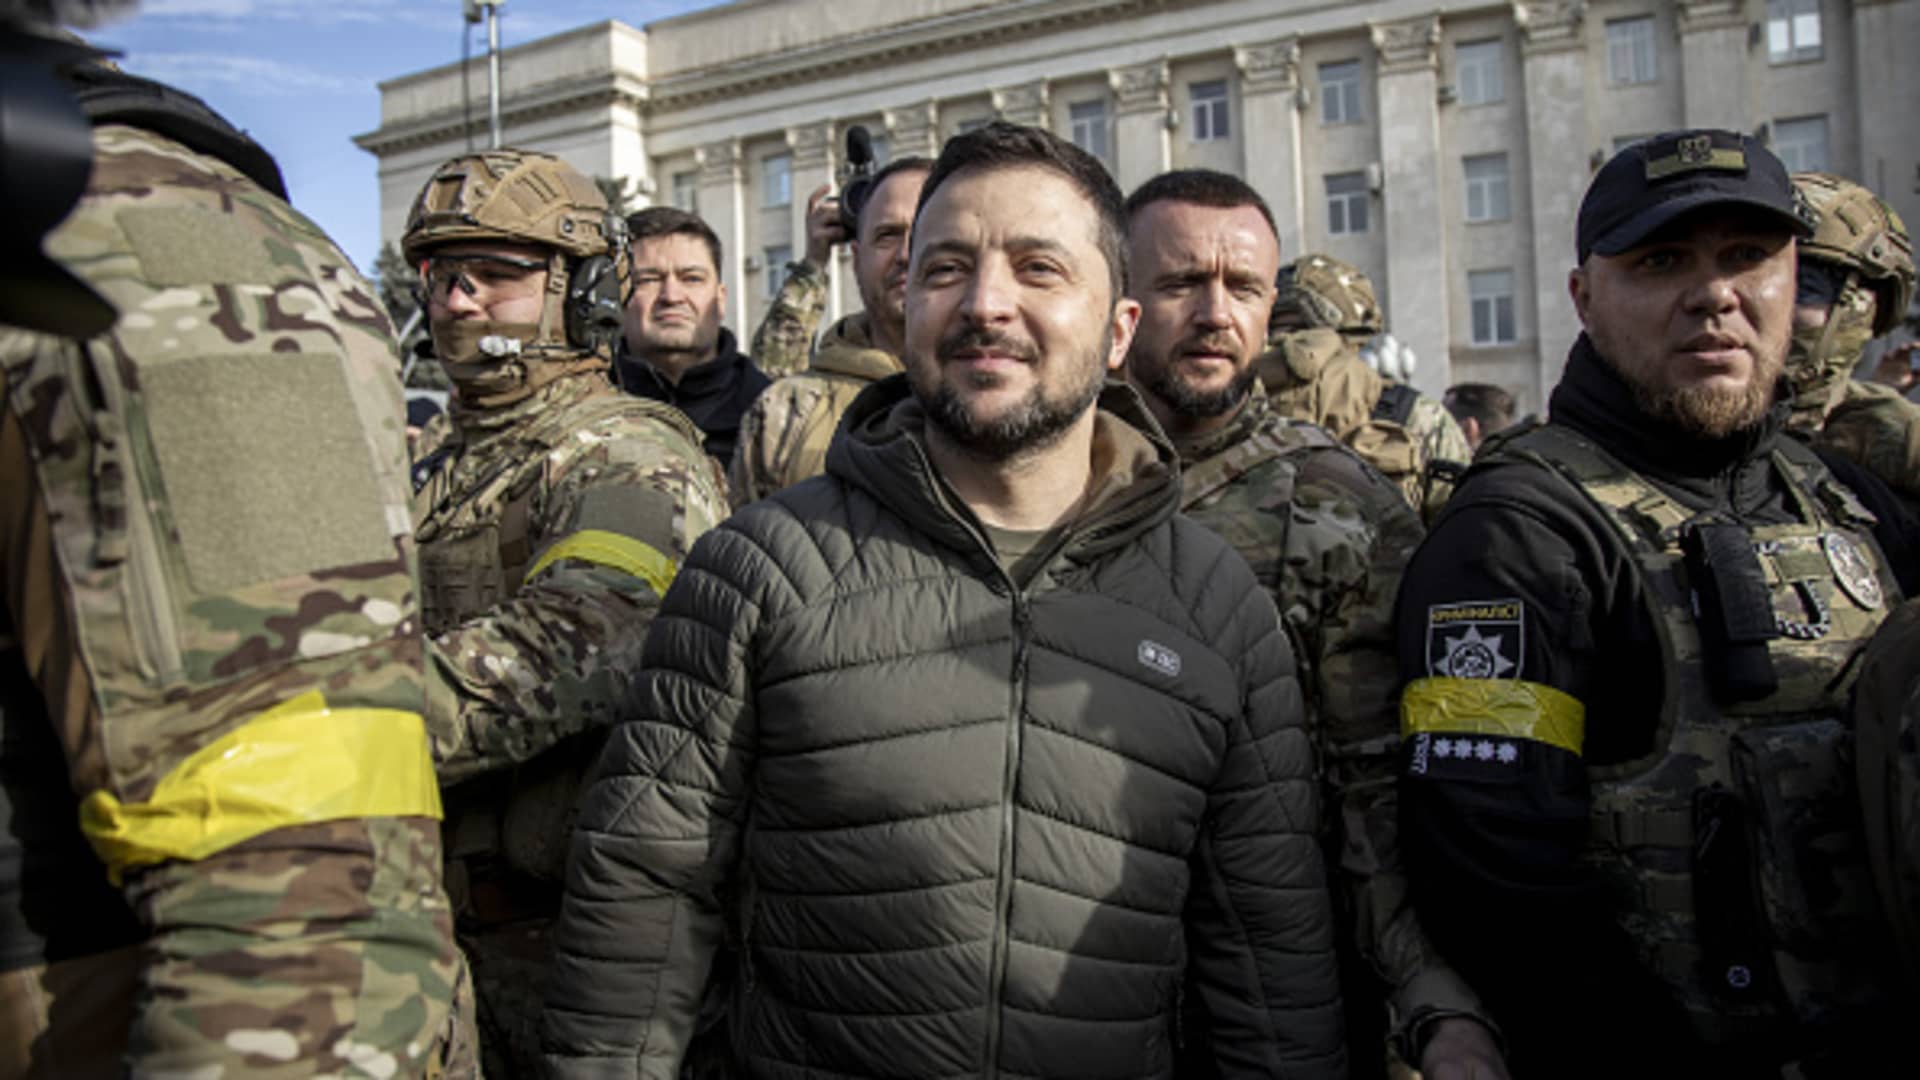 Ukrainian President Volodymr Zelenskyy visits Kherson City for first time after the withdrawal of Russian troops in Ukraine, on Nov. 13, 2022.